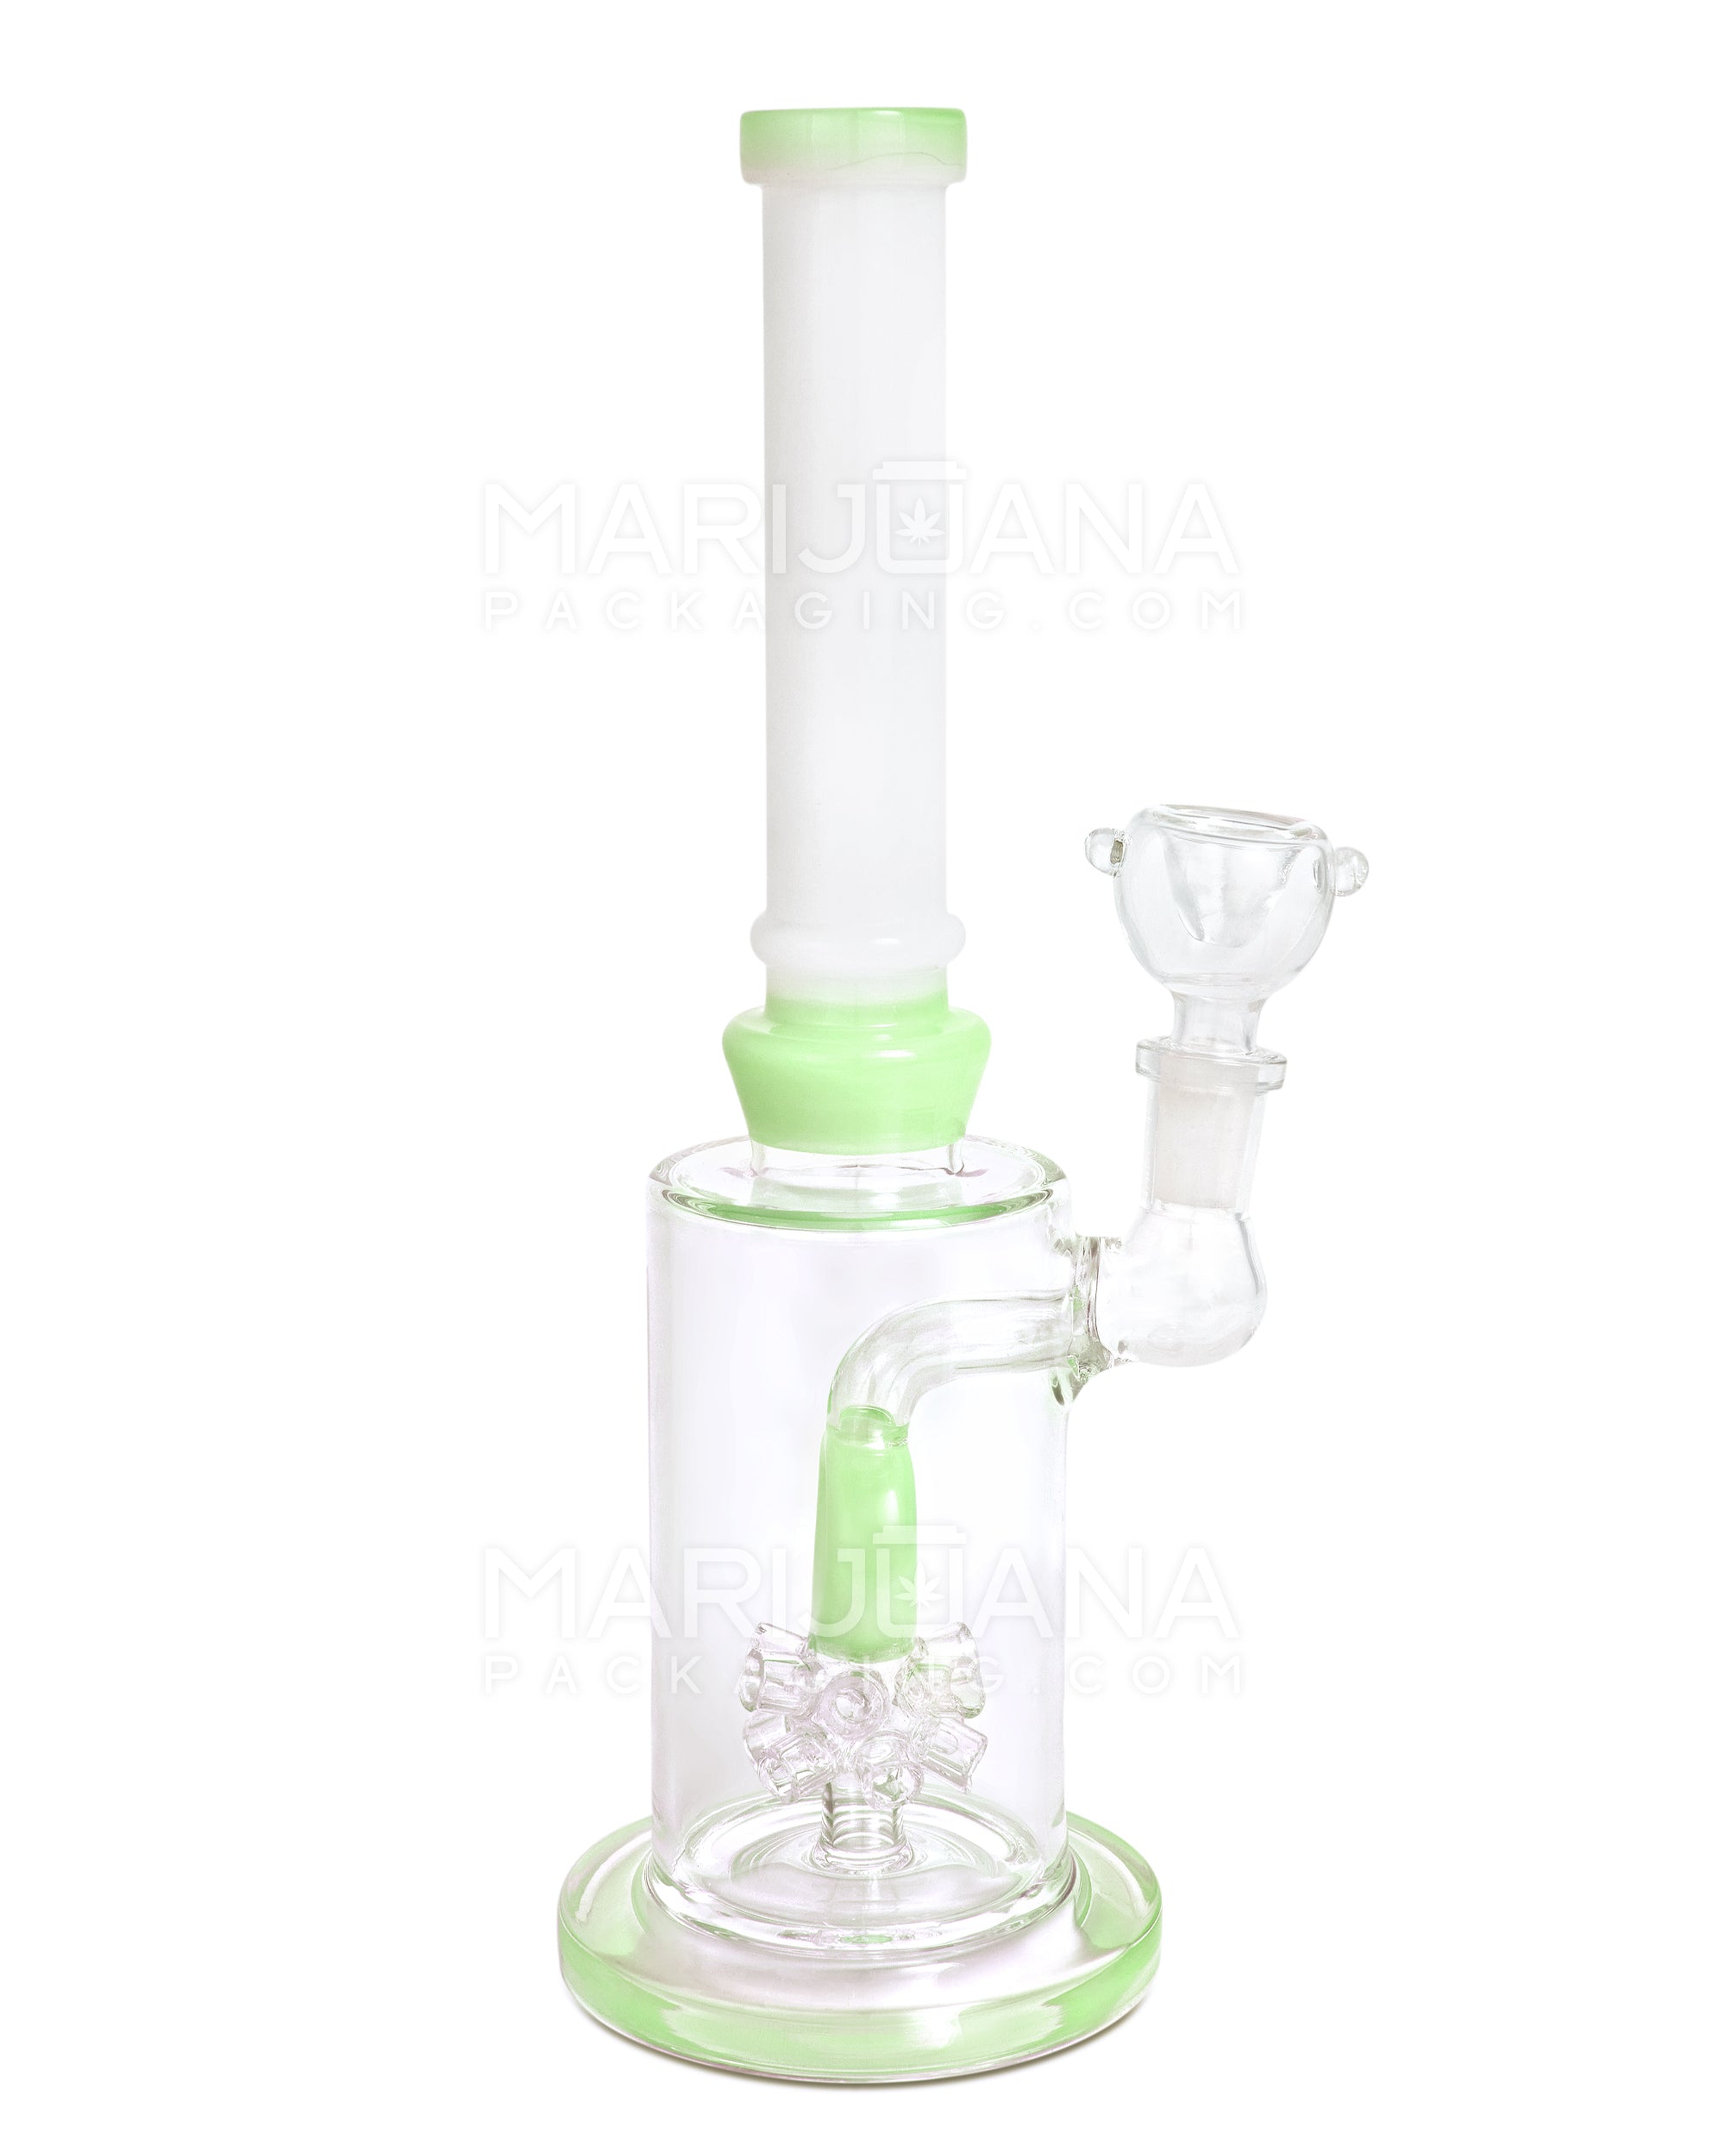 Straight Neck Atomic Donut Perc Glass Water Pipe w/ Thick Base | 10.5in Tall - 14mm Bowl - Slime - 1